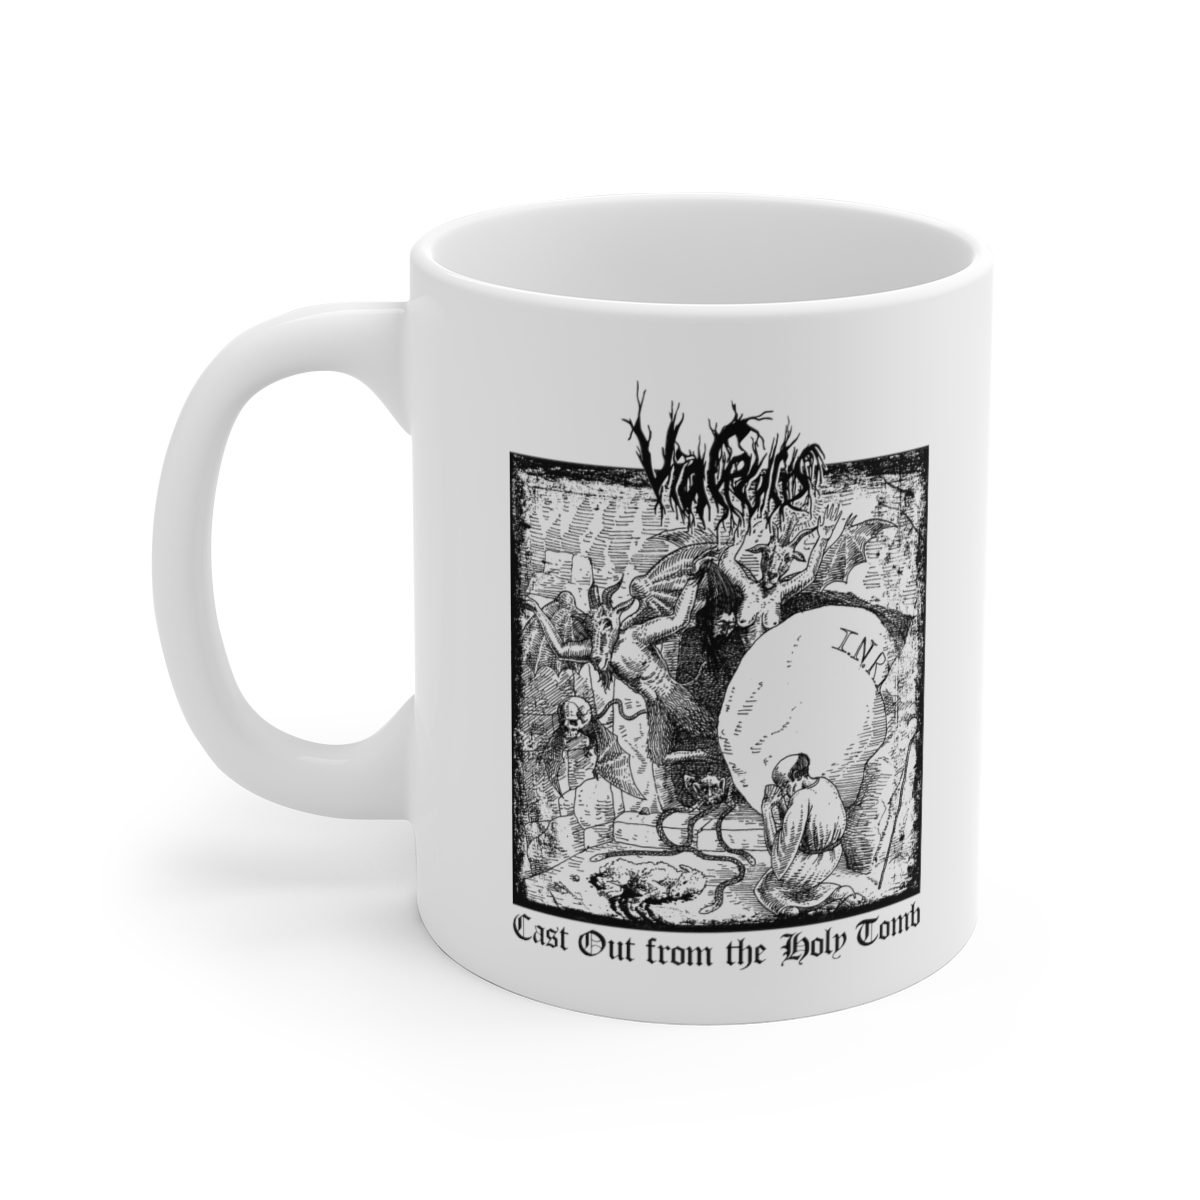 Via Crucis – Cast Out from the Holy Tomb 11oz White Mug